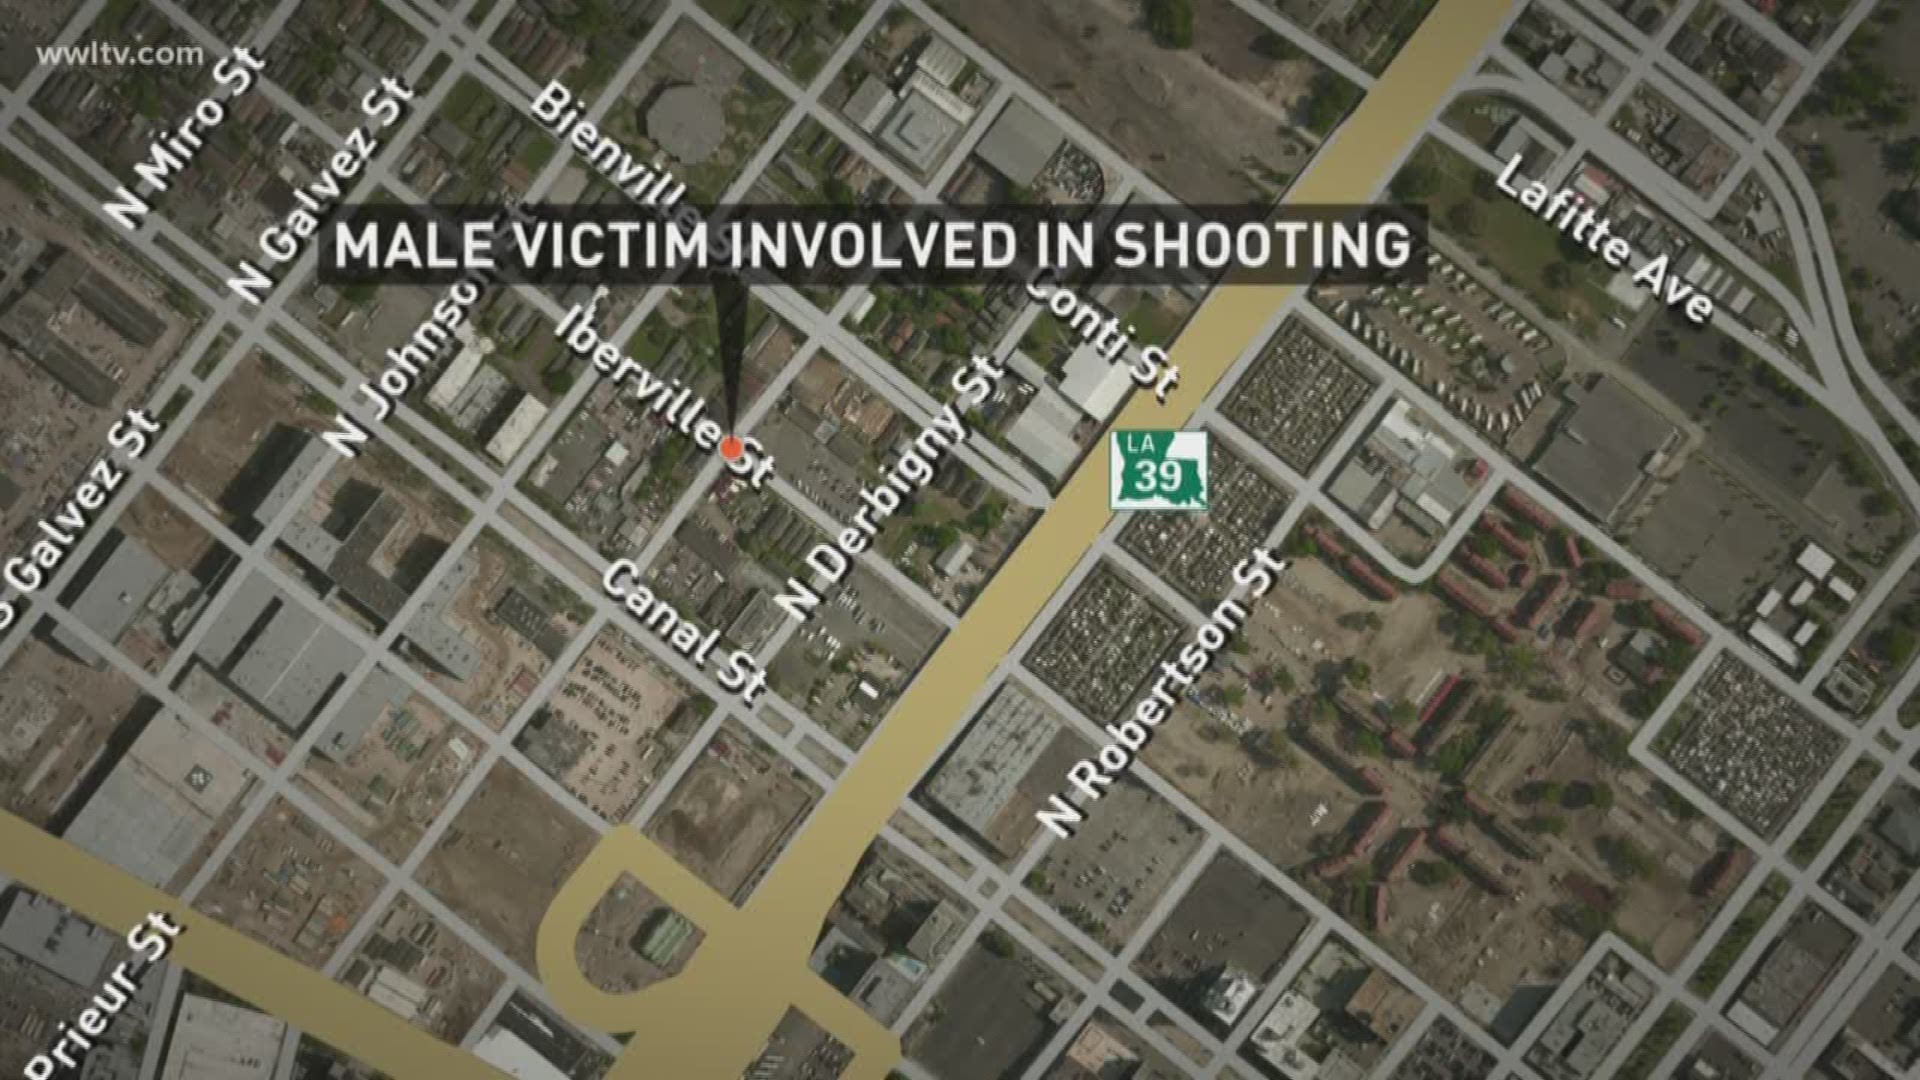 The shooting is under investigation, NOPD officials say.